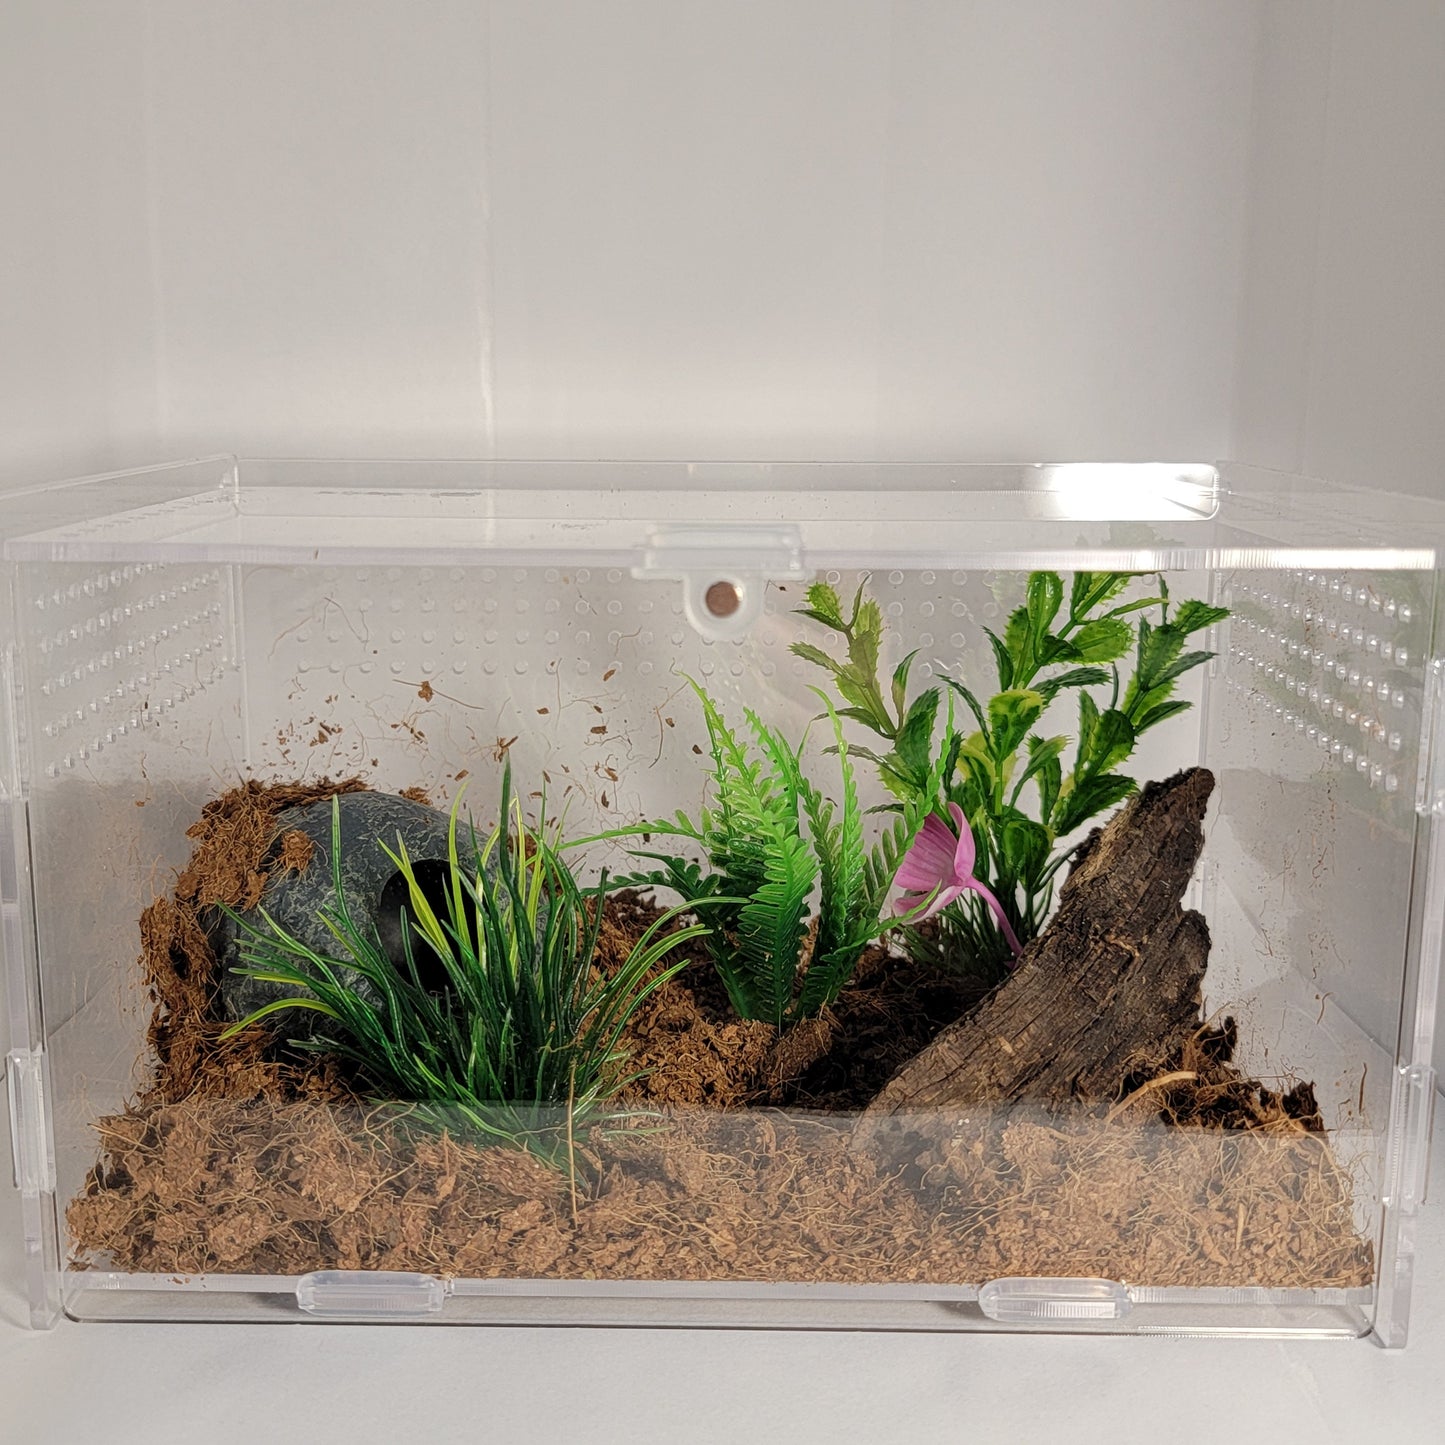 4"x4"x7" Acrylic Enclosure | The Critters Cave